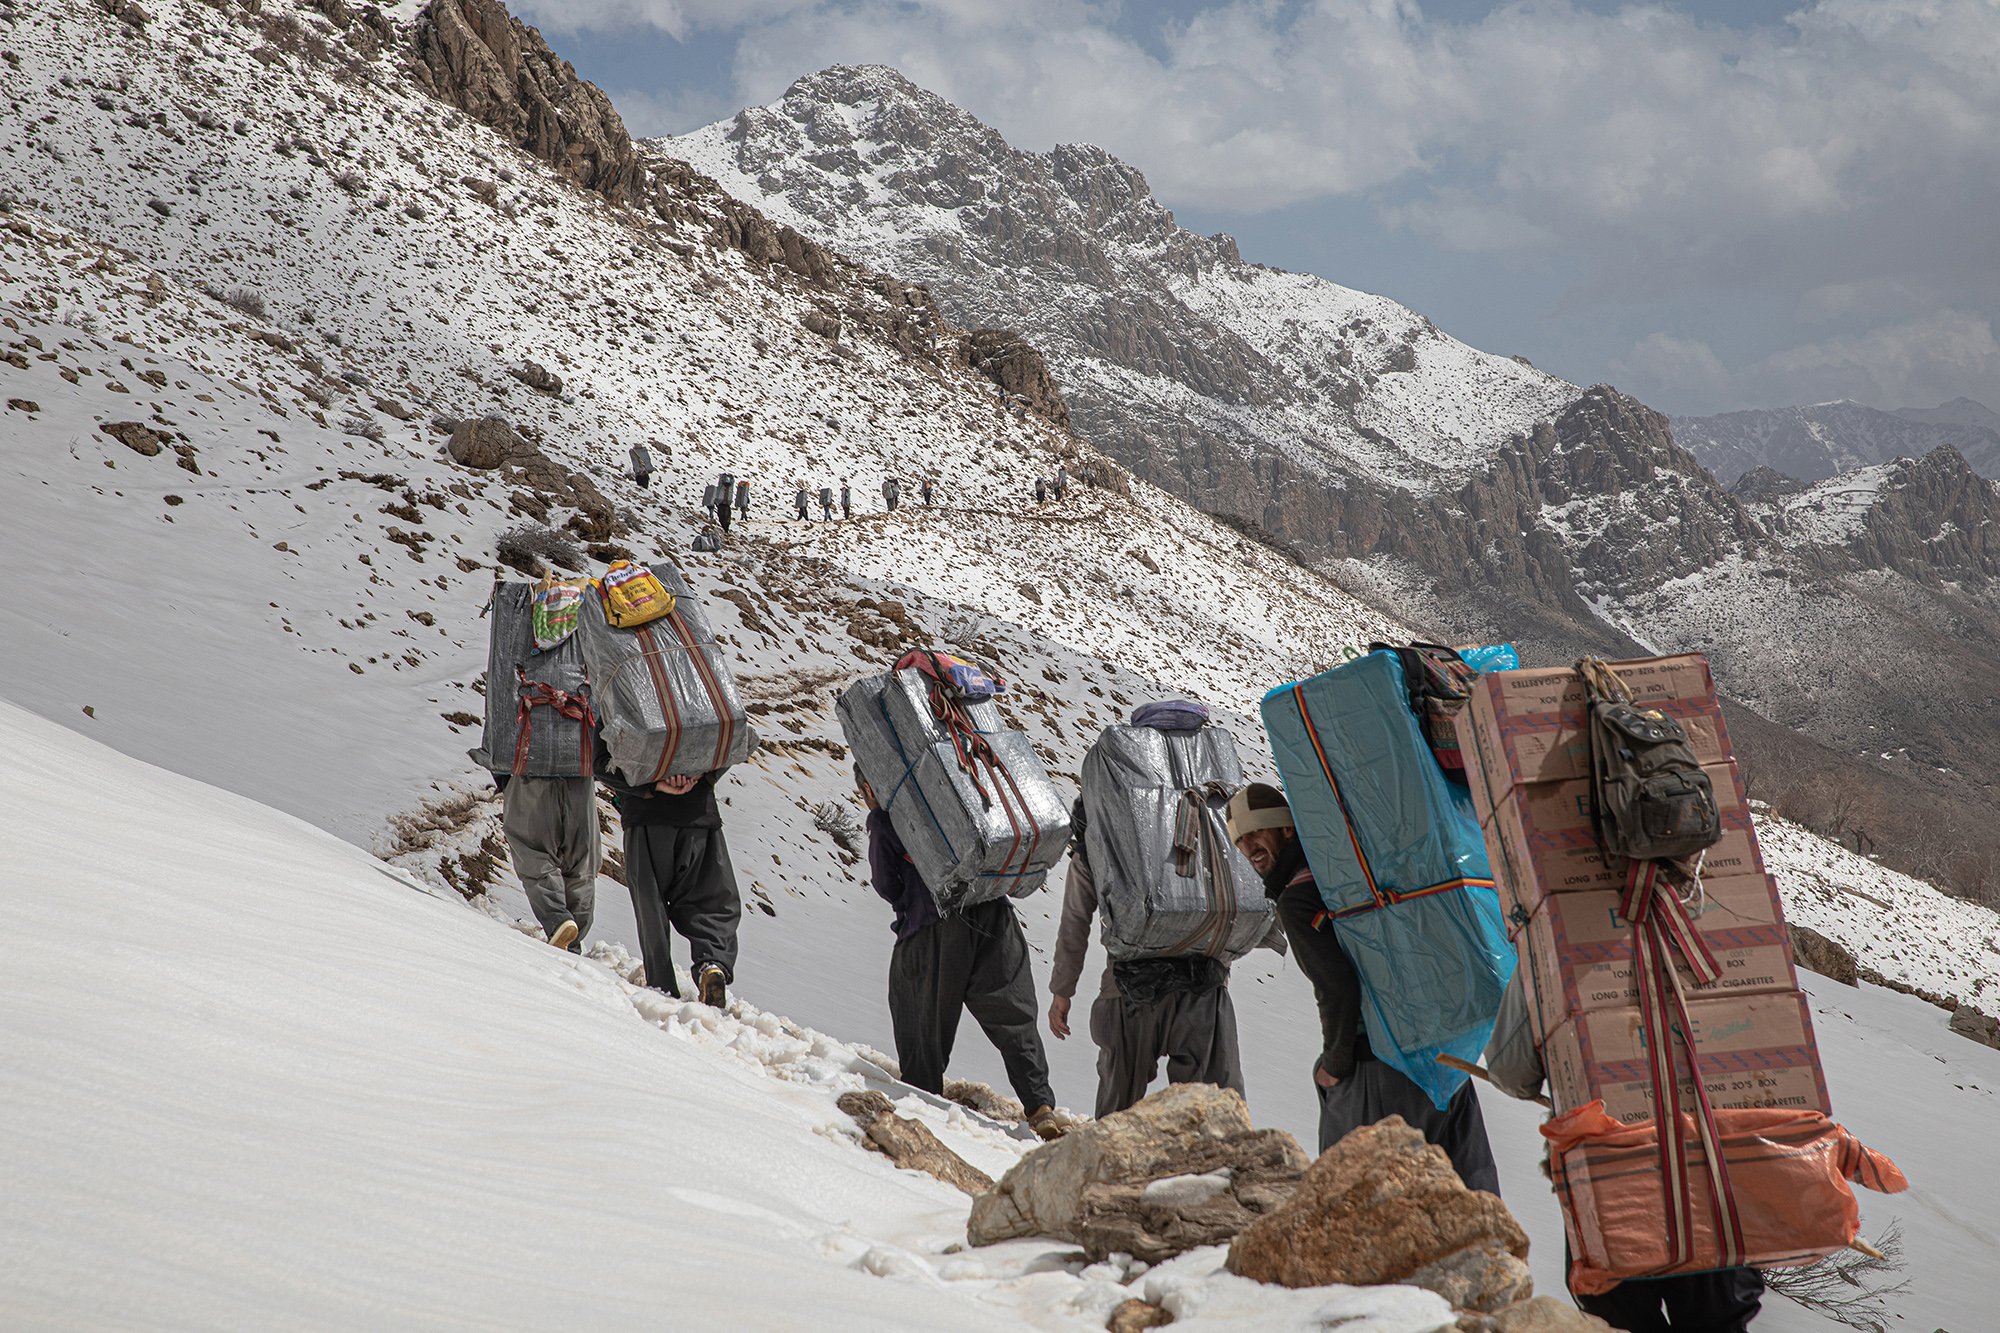 Koolbars crossing the Zagros mountains on the border of Iran and Iraq.